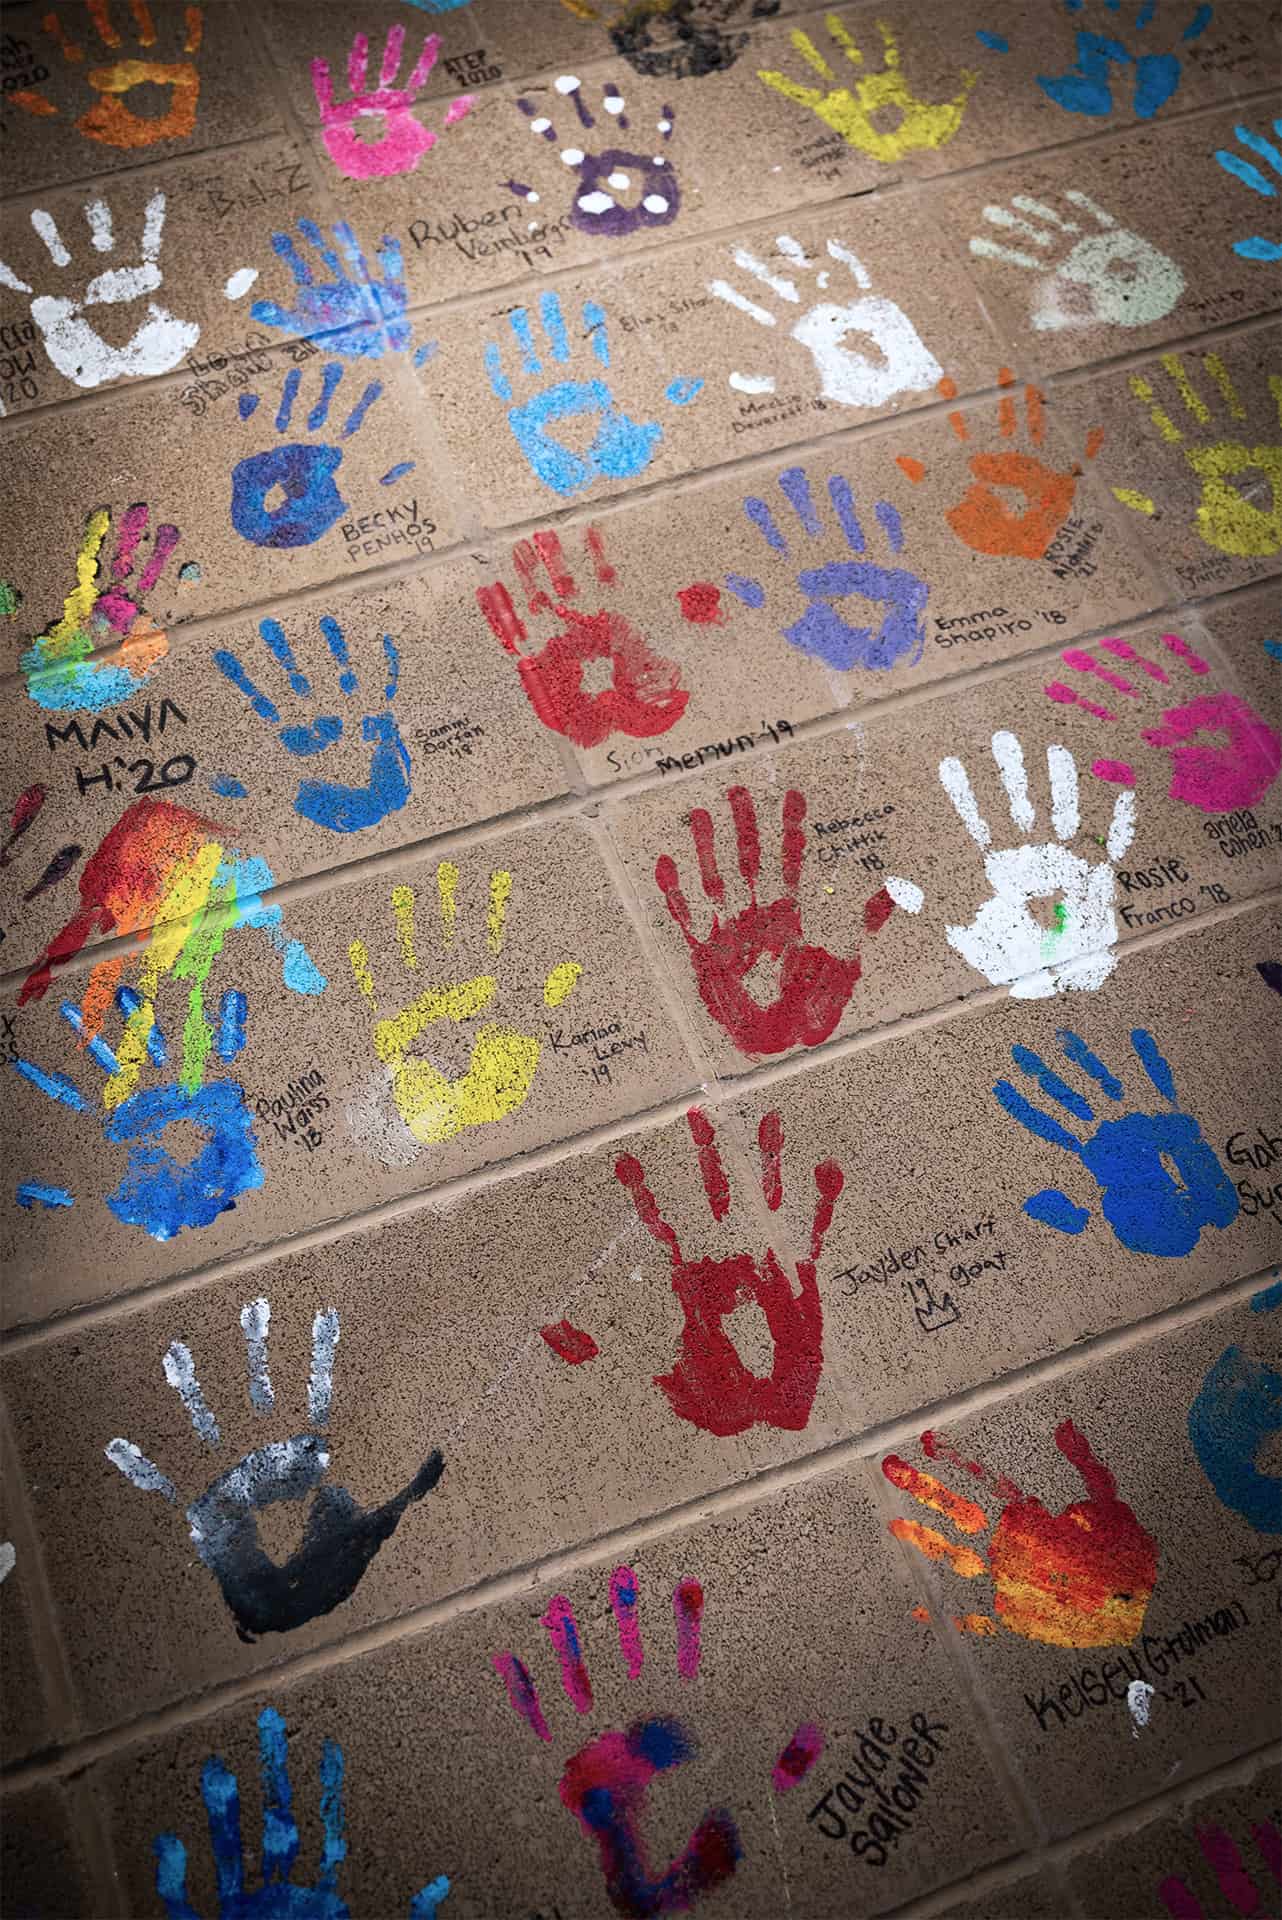 Handprints in different colored paint decorating a brick wall